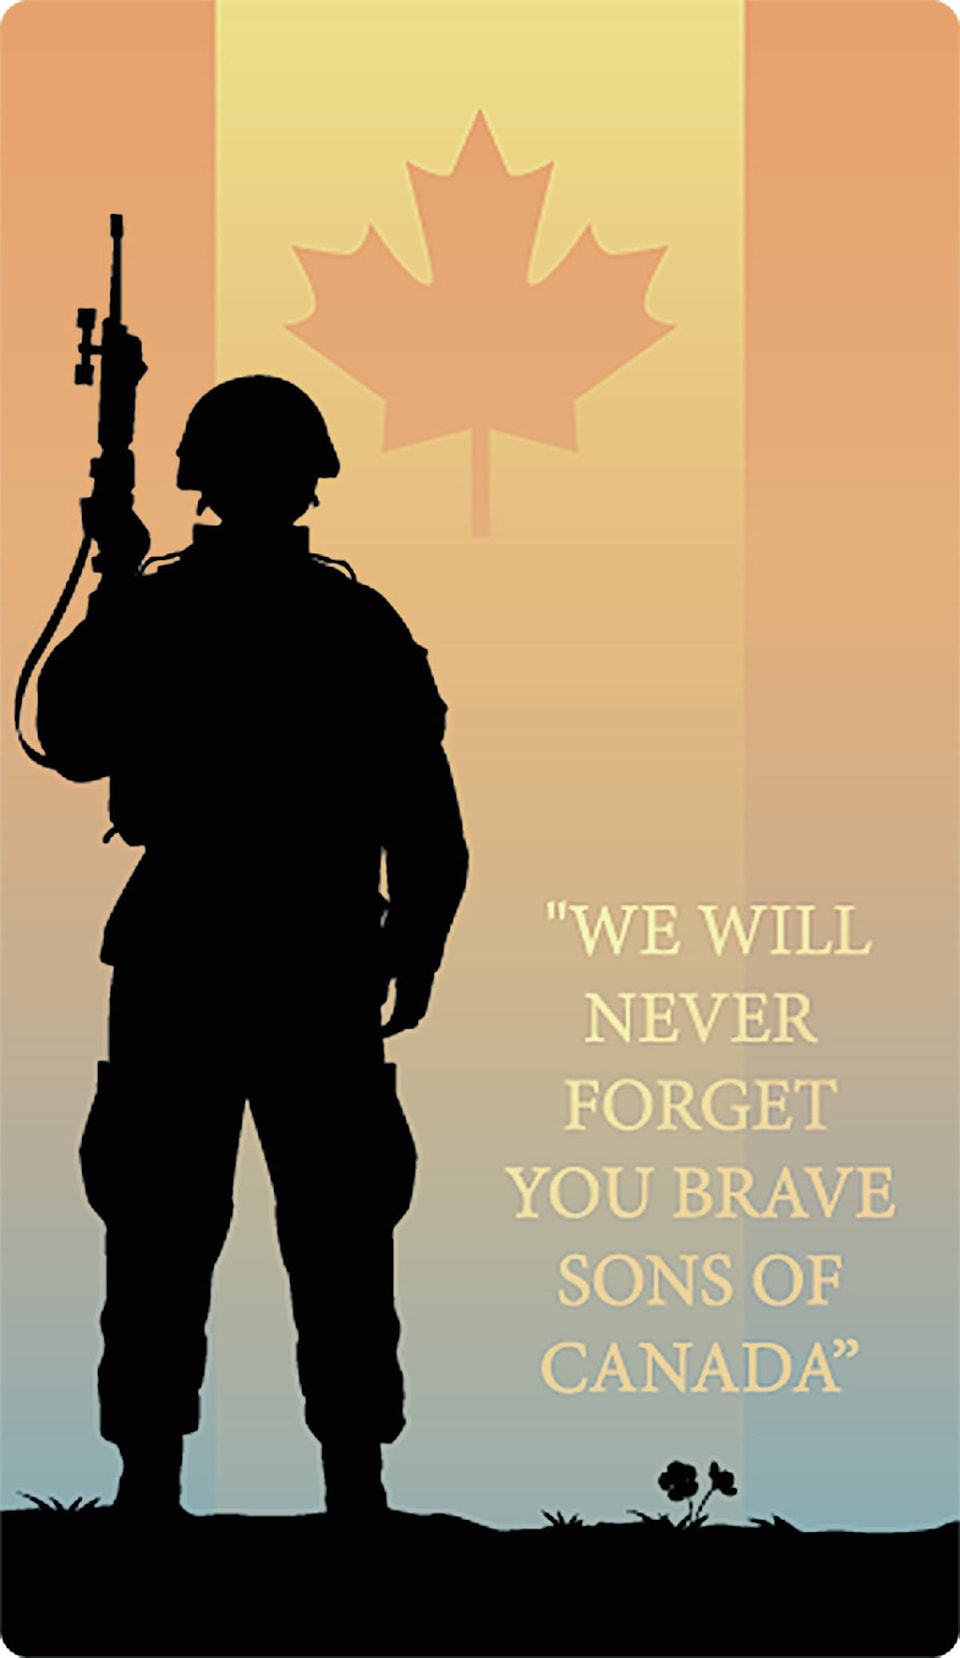 19320858_web1_Remembrance-Day-image